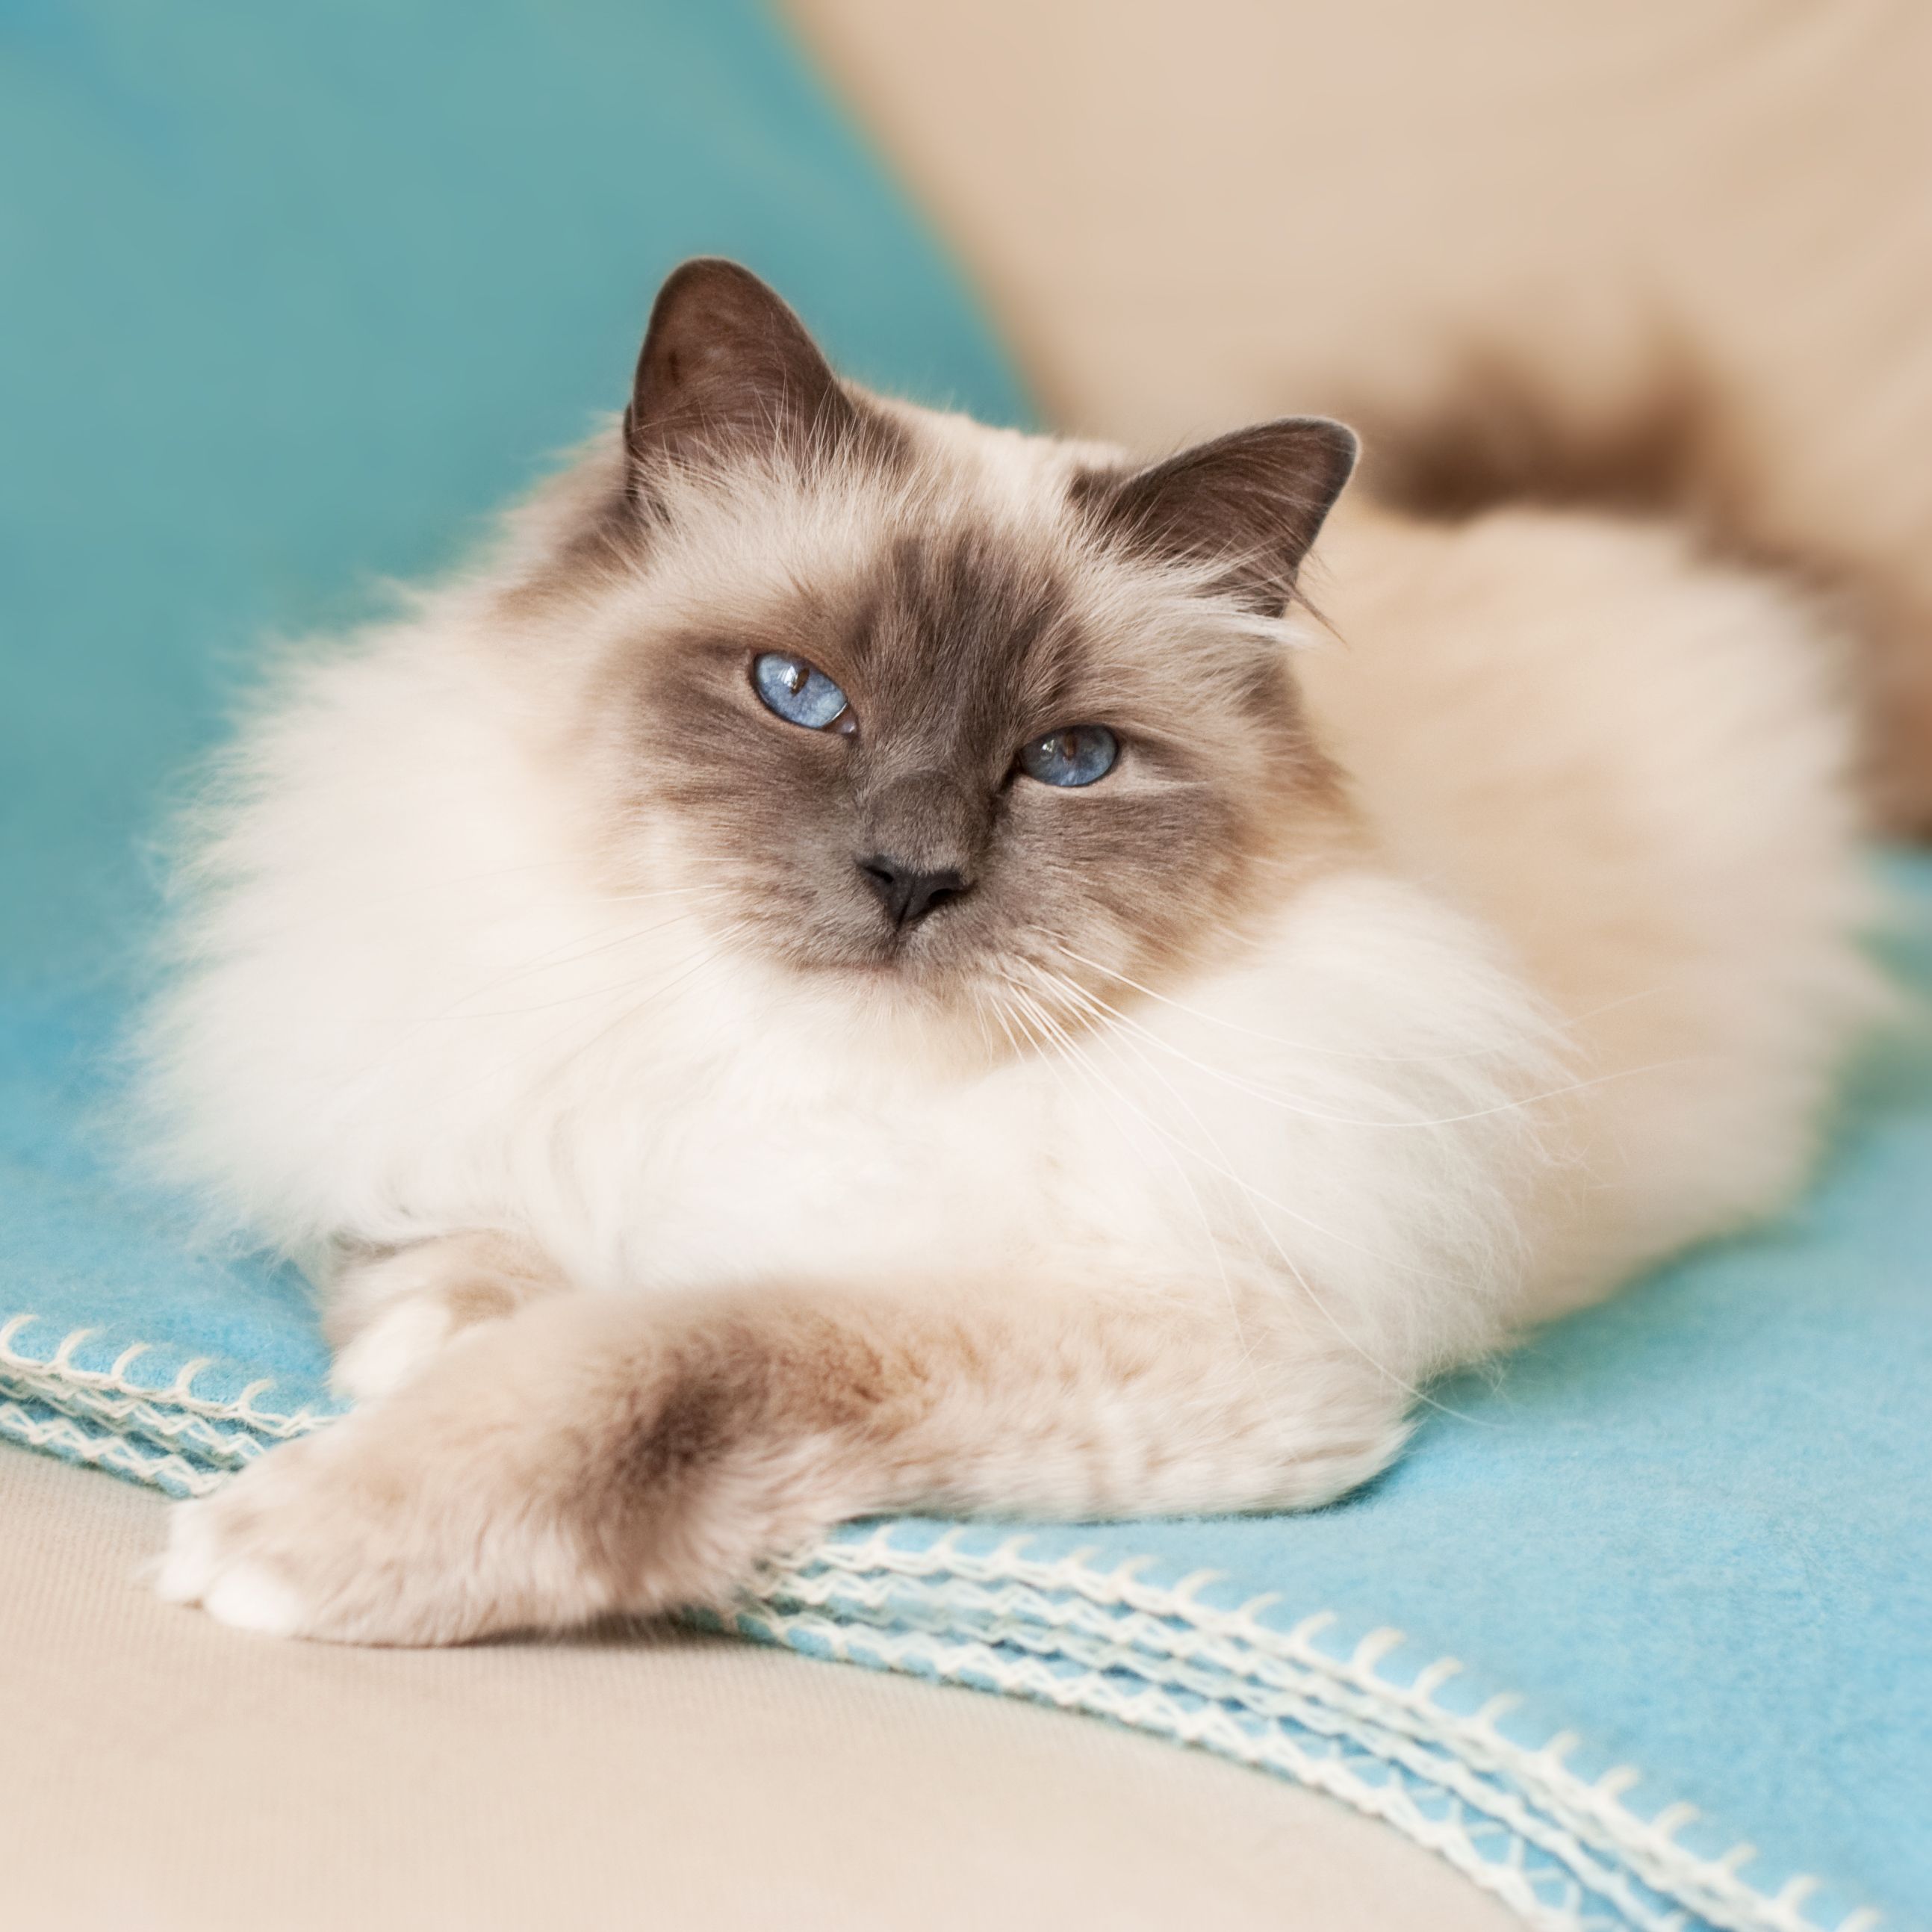 14 Cute Cat Breeds: Ragdolls, Egyptian Mau, and More